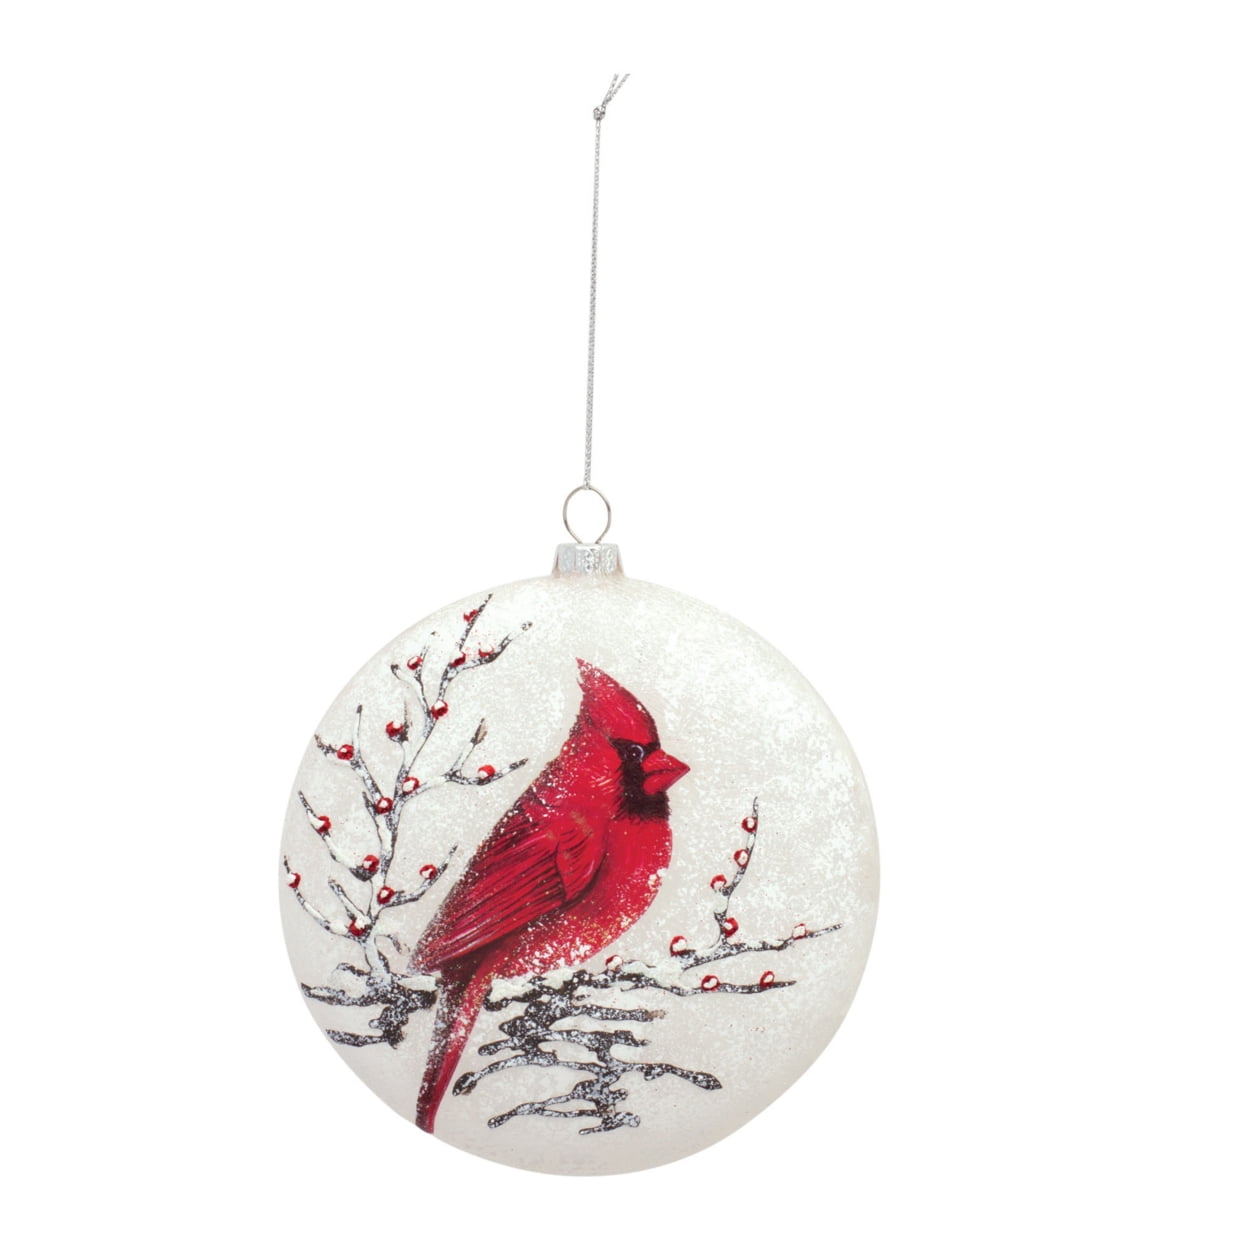 VOSS Christmas Tree Ornaments Gorgeous And Delicate Glittered Bird